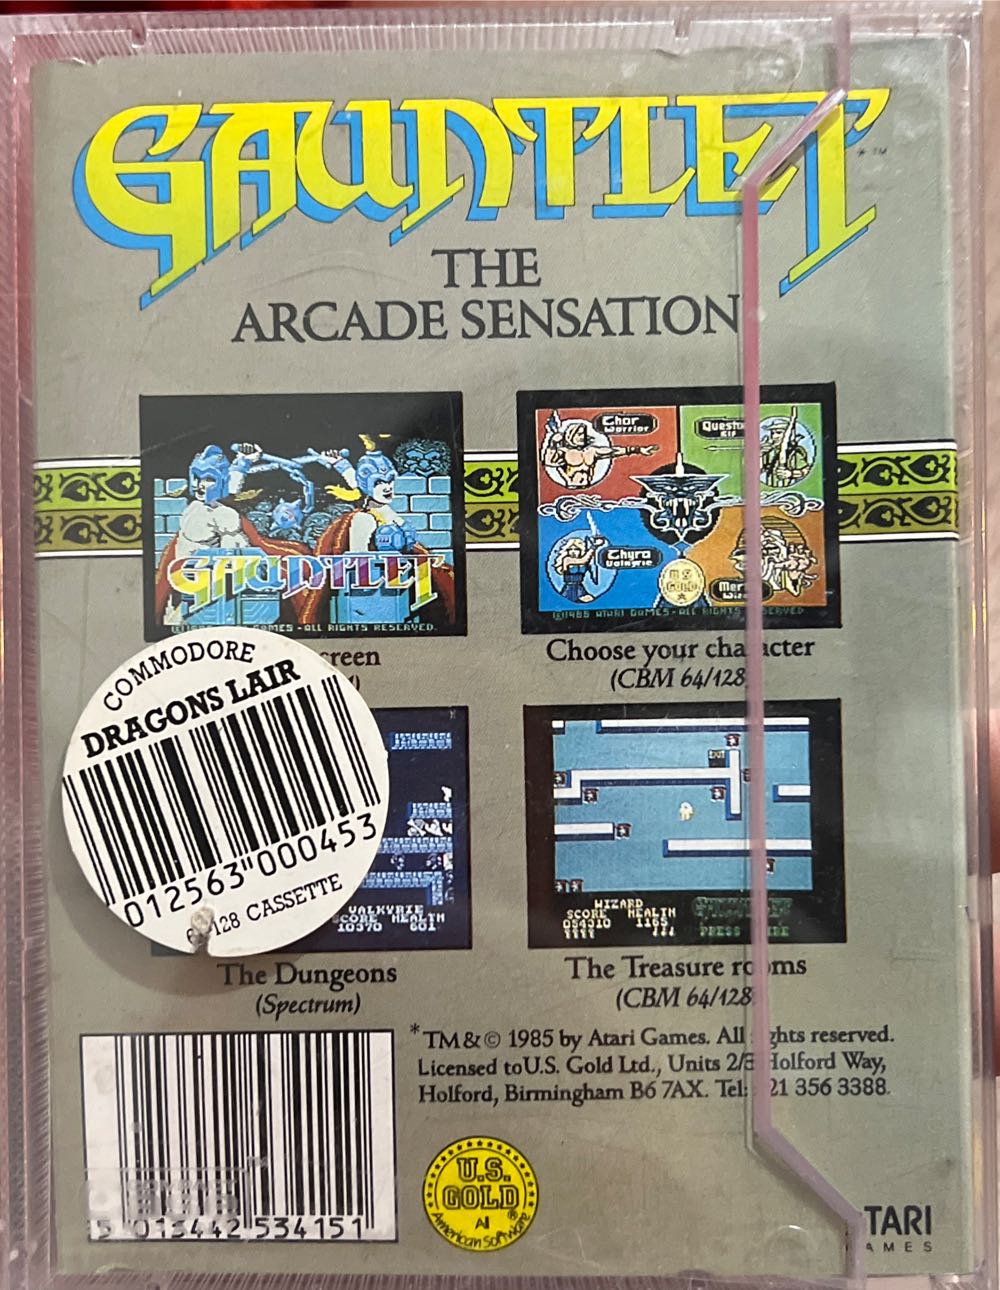 Gauntlet - Sinclair ZX Spectrum (US Gold) video game collectible [Barcode 5013442534151] - Main Image 2